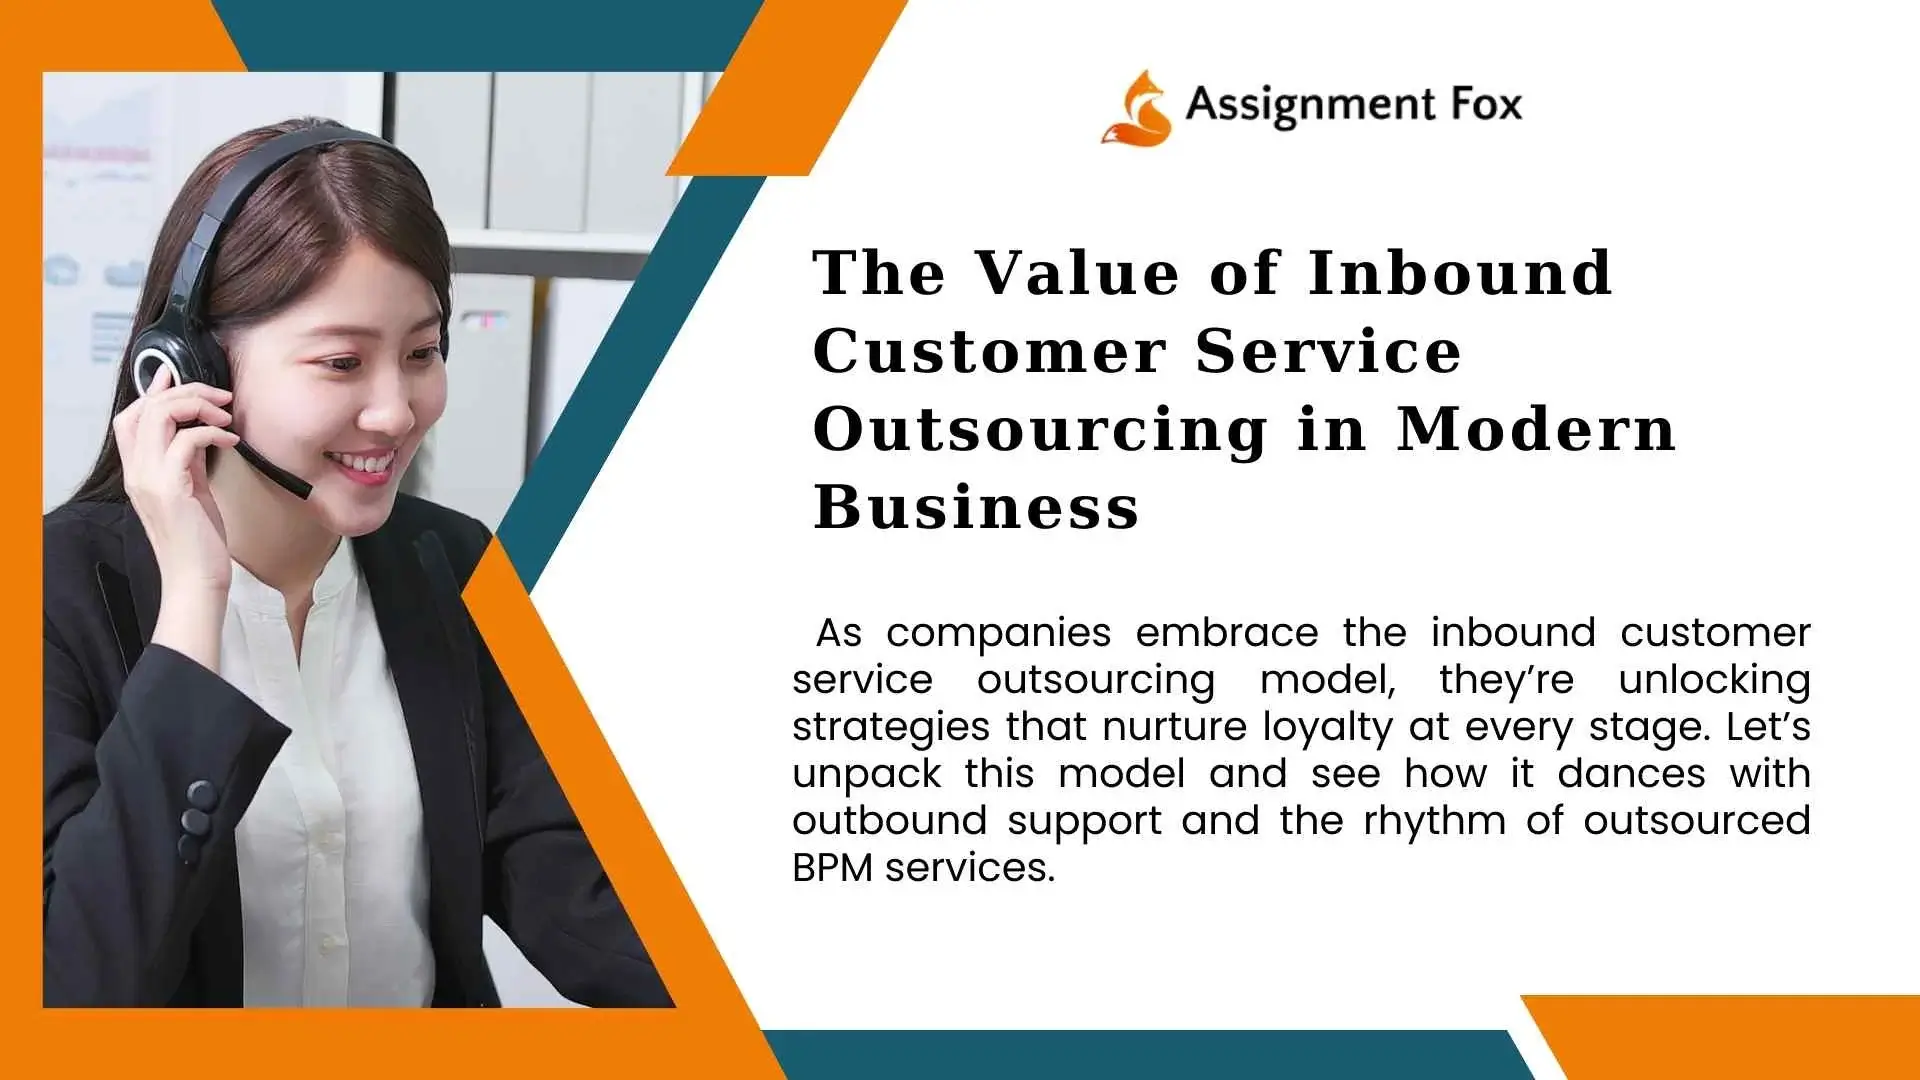 The Value of Inbound Customer Service Outsourcing in Modern Business